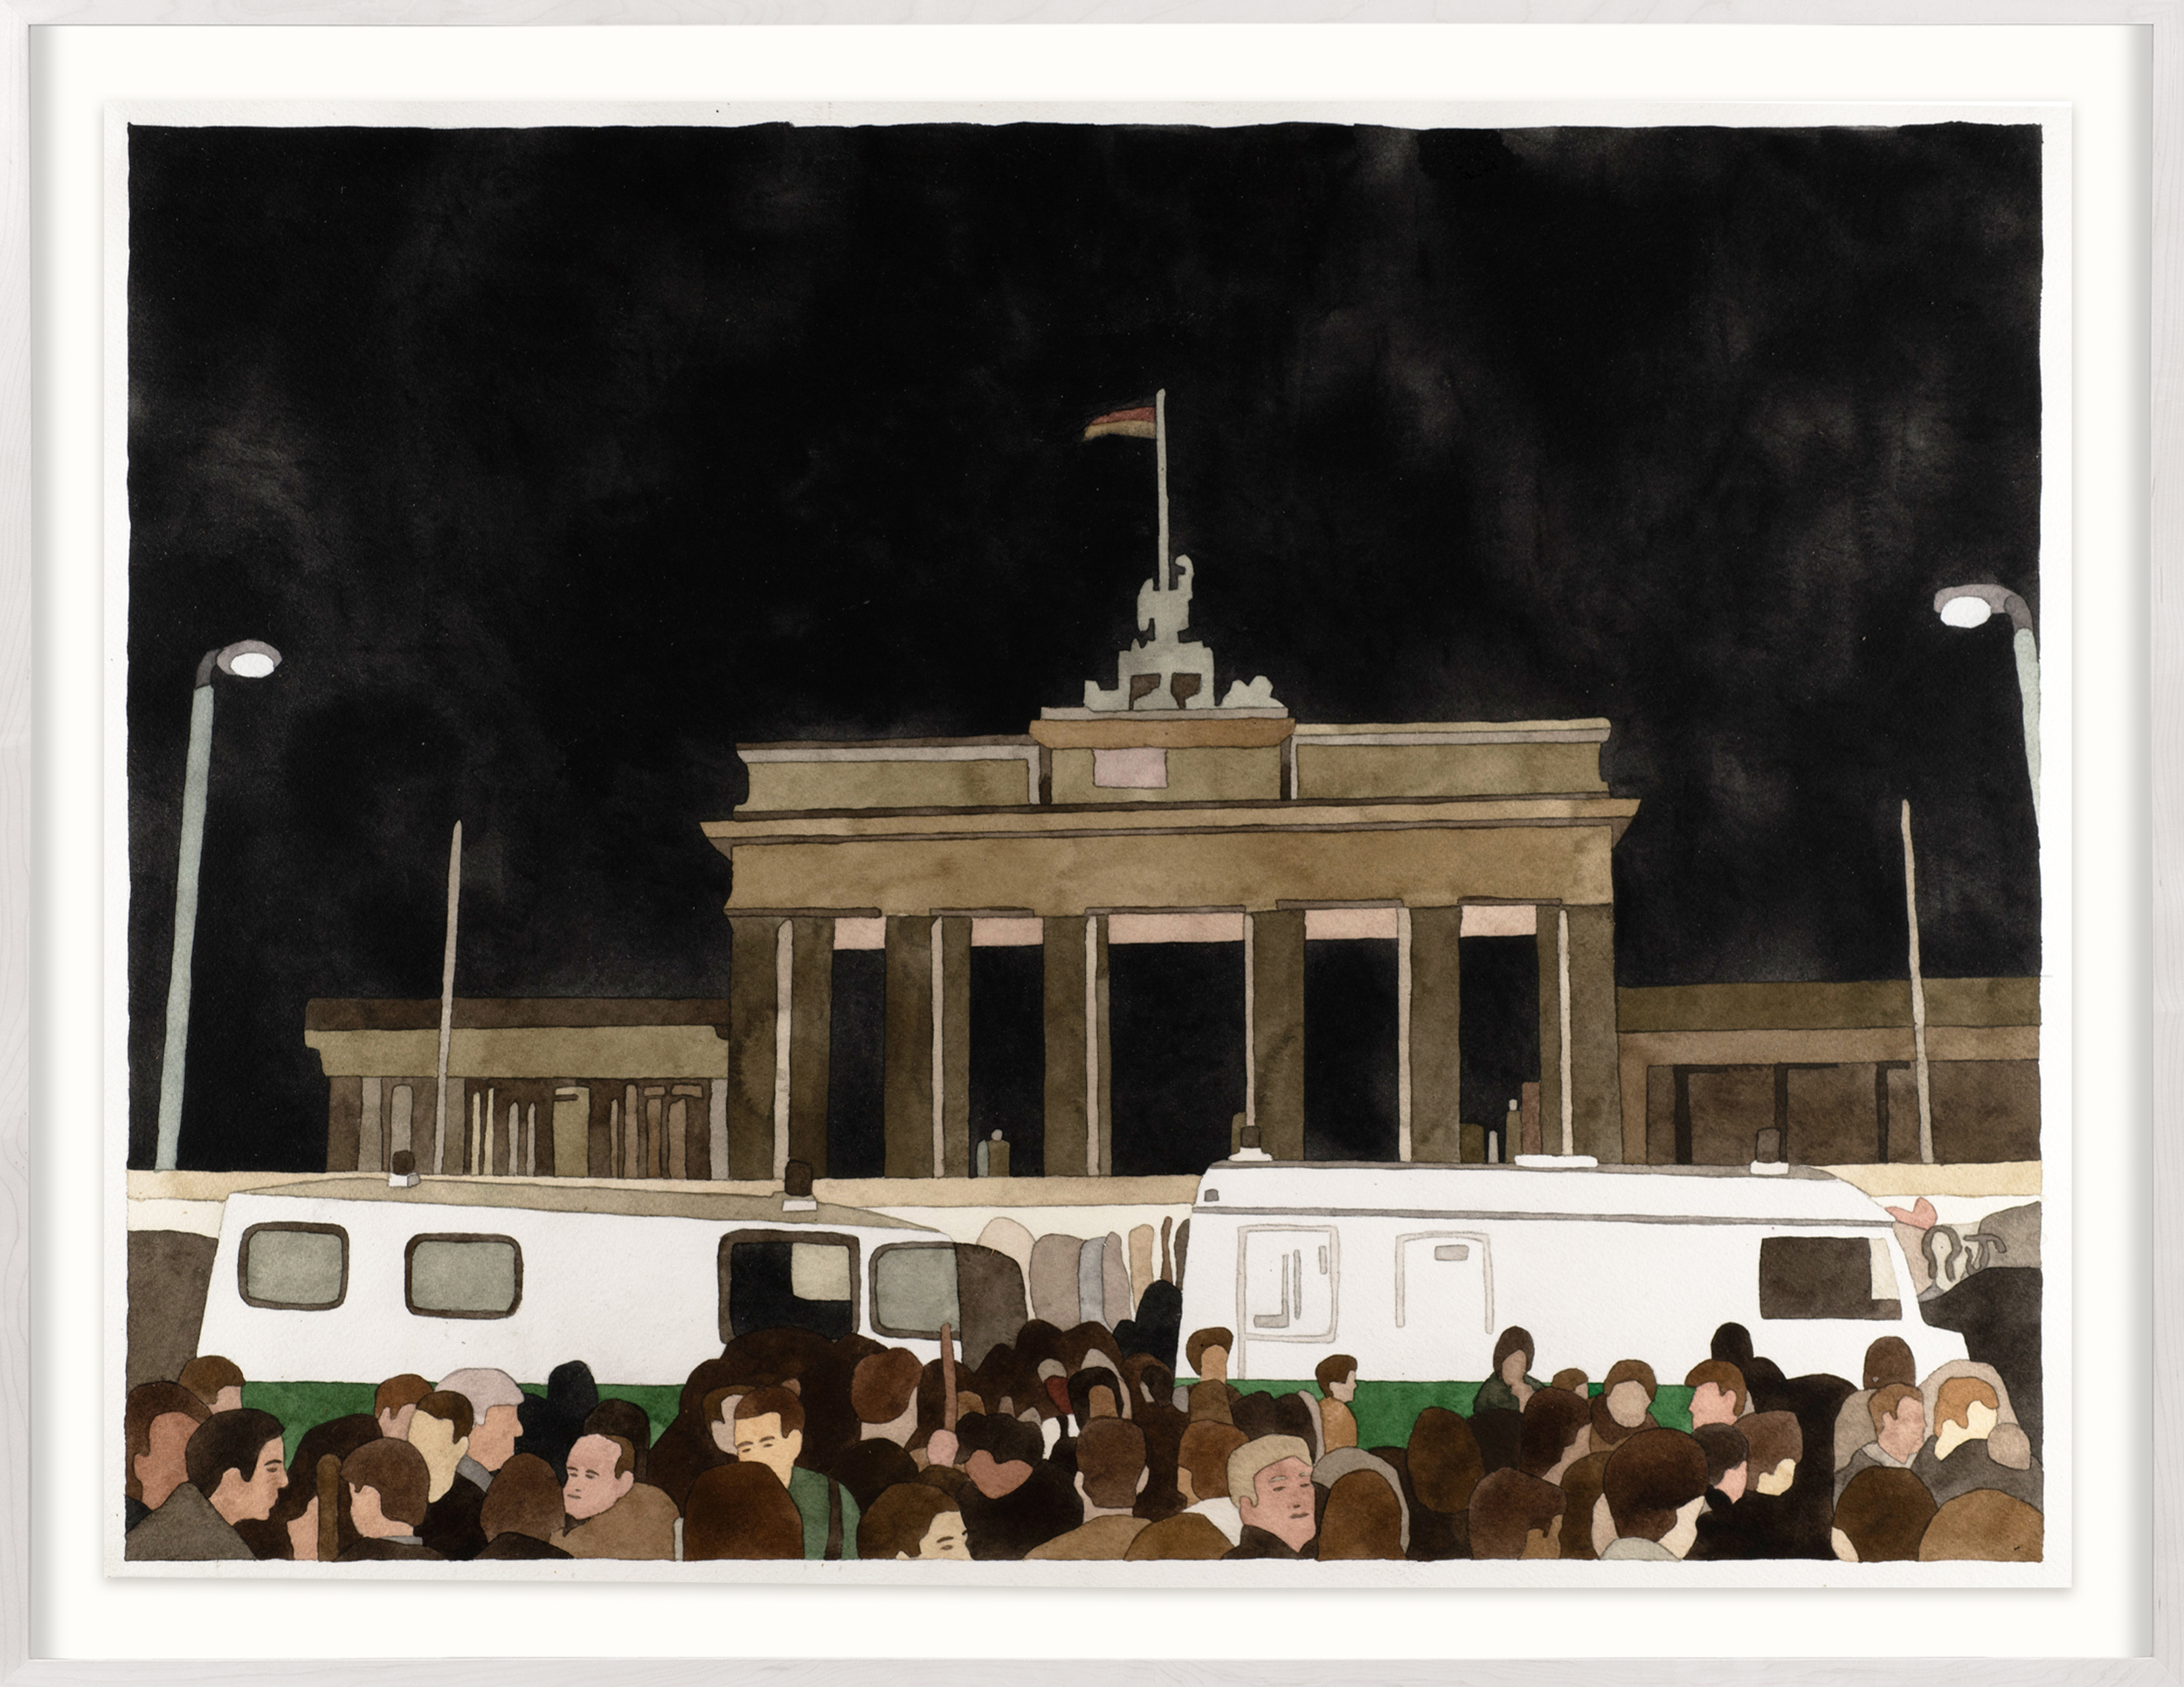 A color image of a framed watercolor painting depicting a crowd of people, buses, and a German governmental building